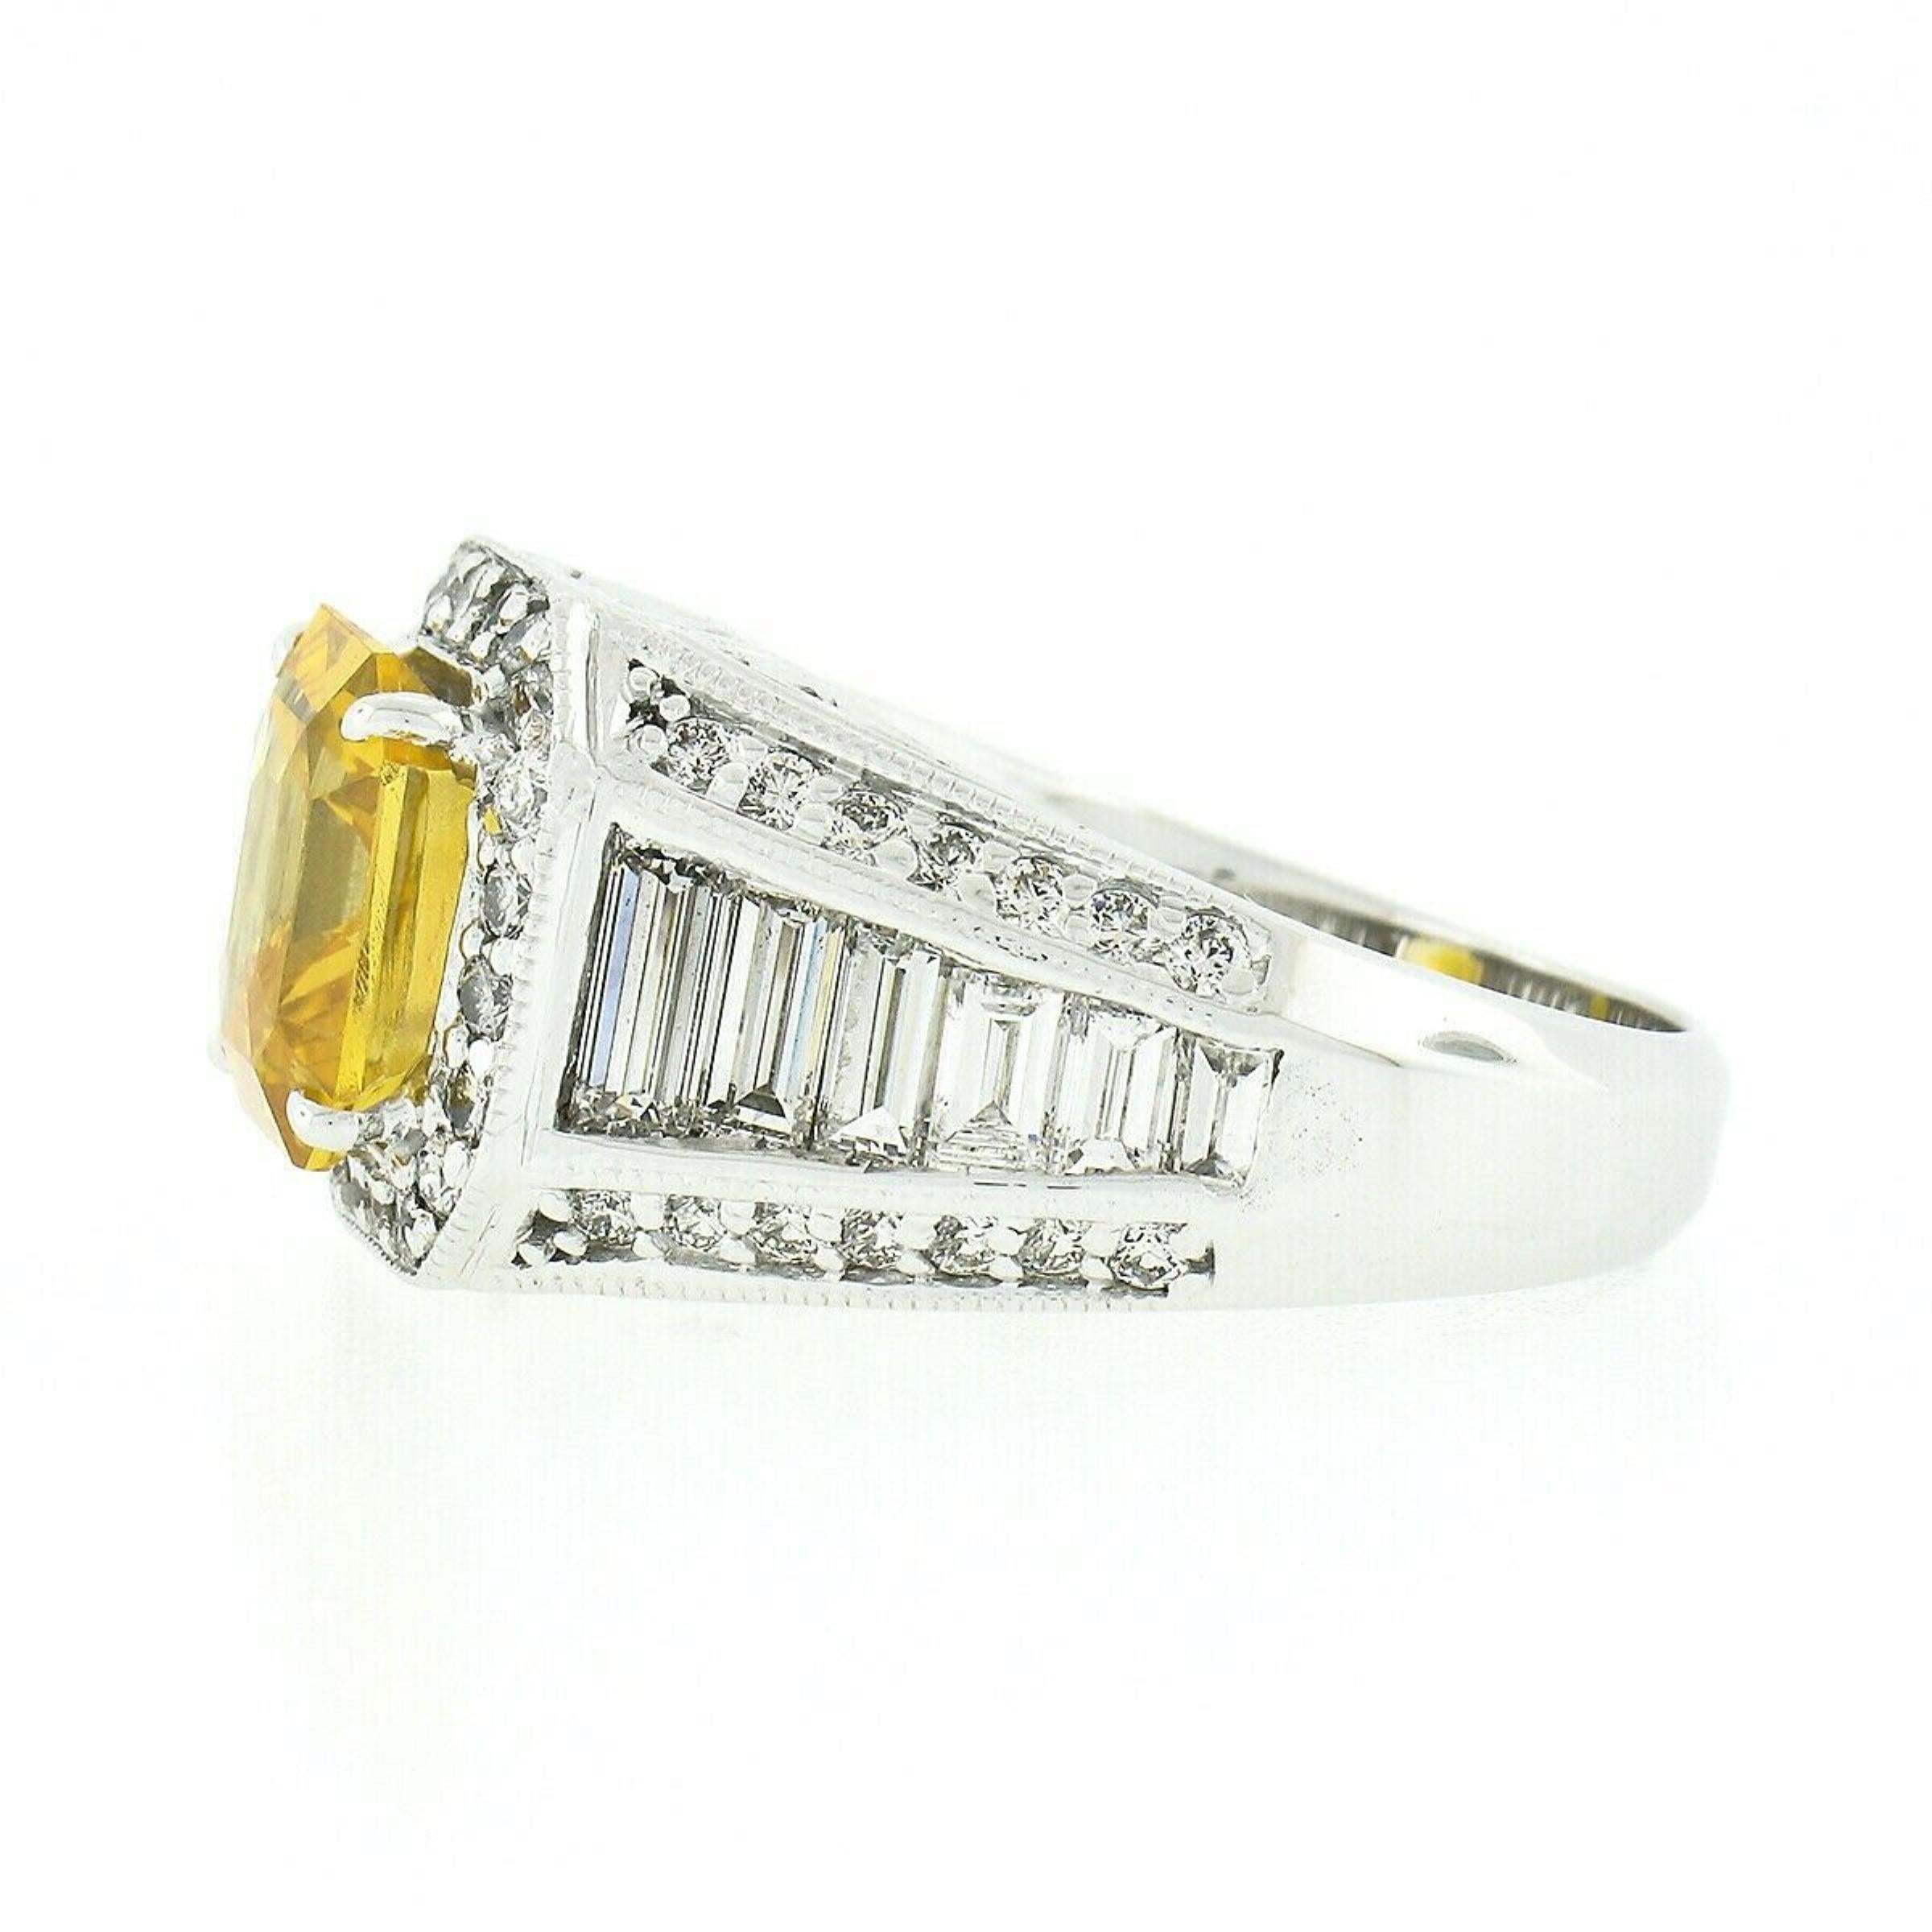 Vintage 18K White Gold 6.95ct GIA Orangy Yellow Sapphire & Diamond Cocktail Ring In Excellent Condition For Sale In Montclair, NJ